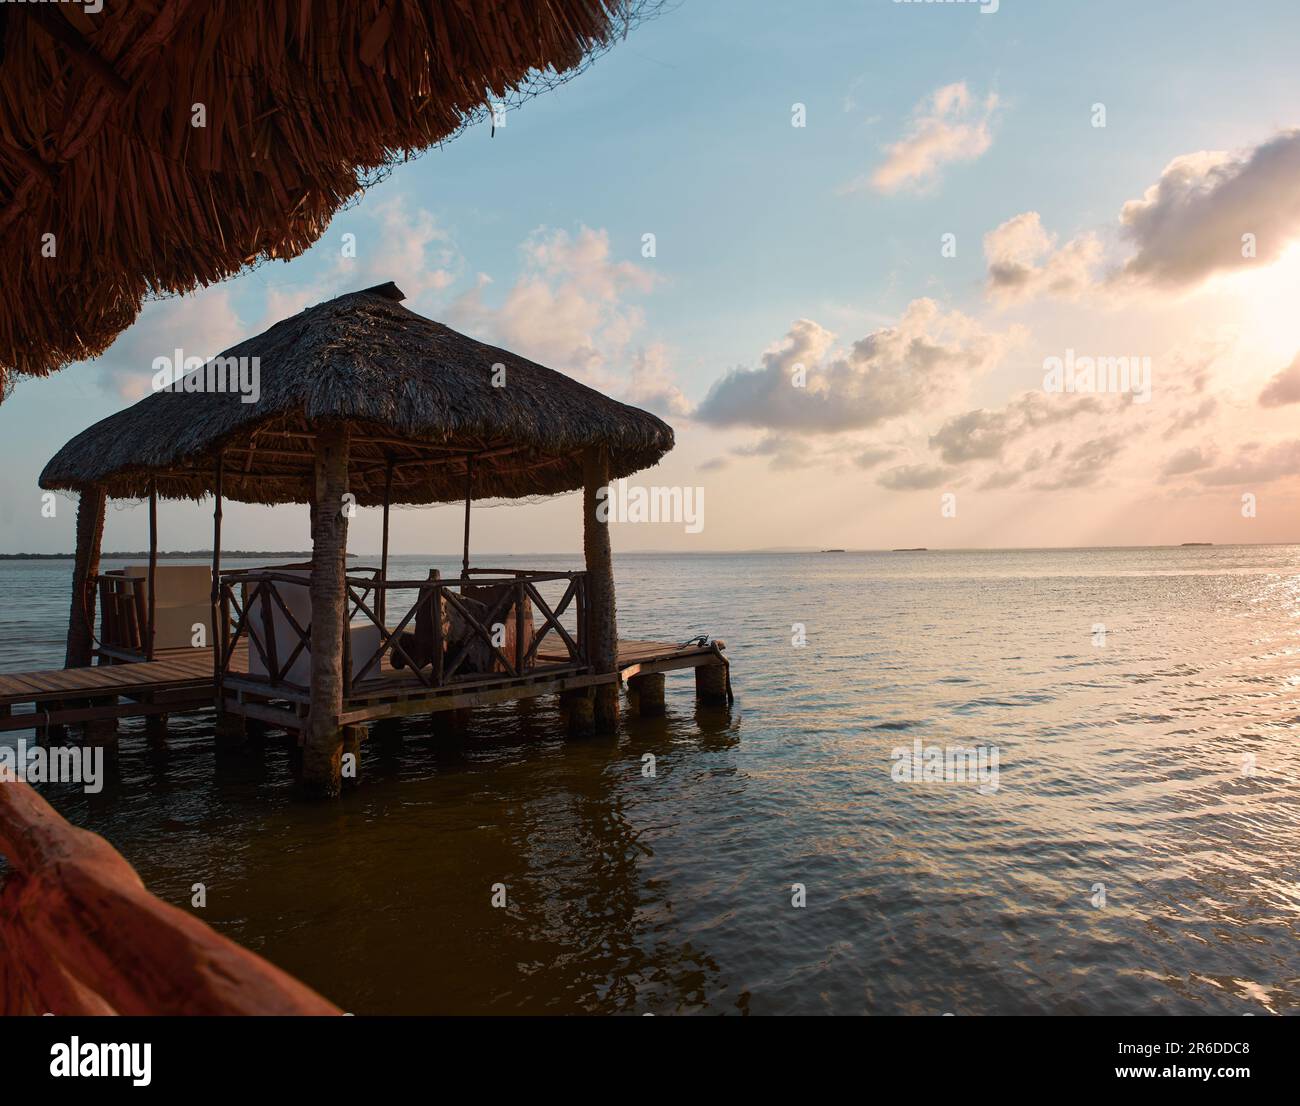 wooden dock with thatched roof, traditional Mexican design in the summer sunset with the lake of Old Town city in the background without boats, no peo Stock Photo